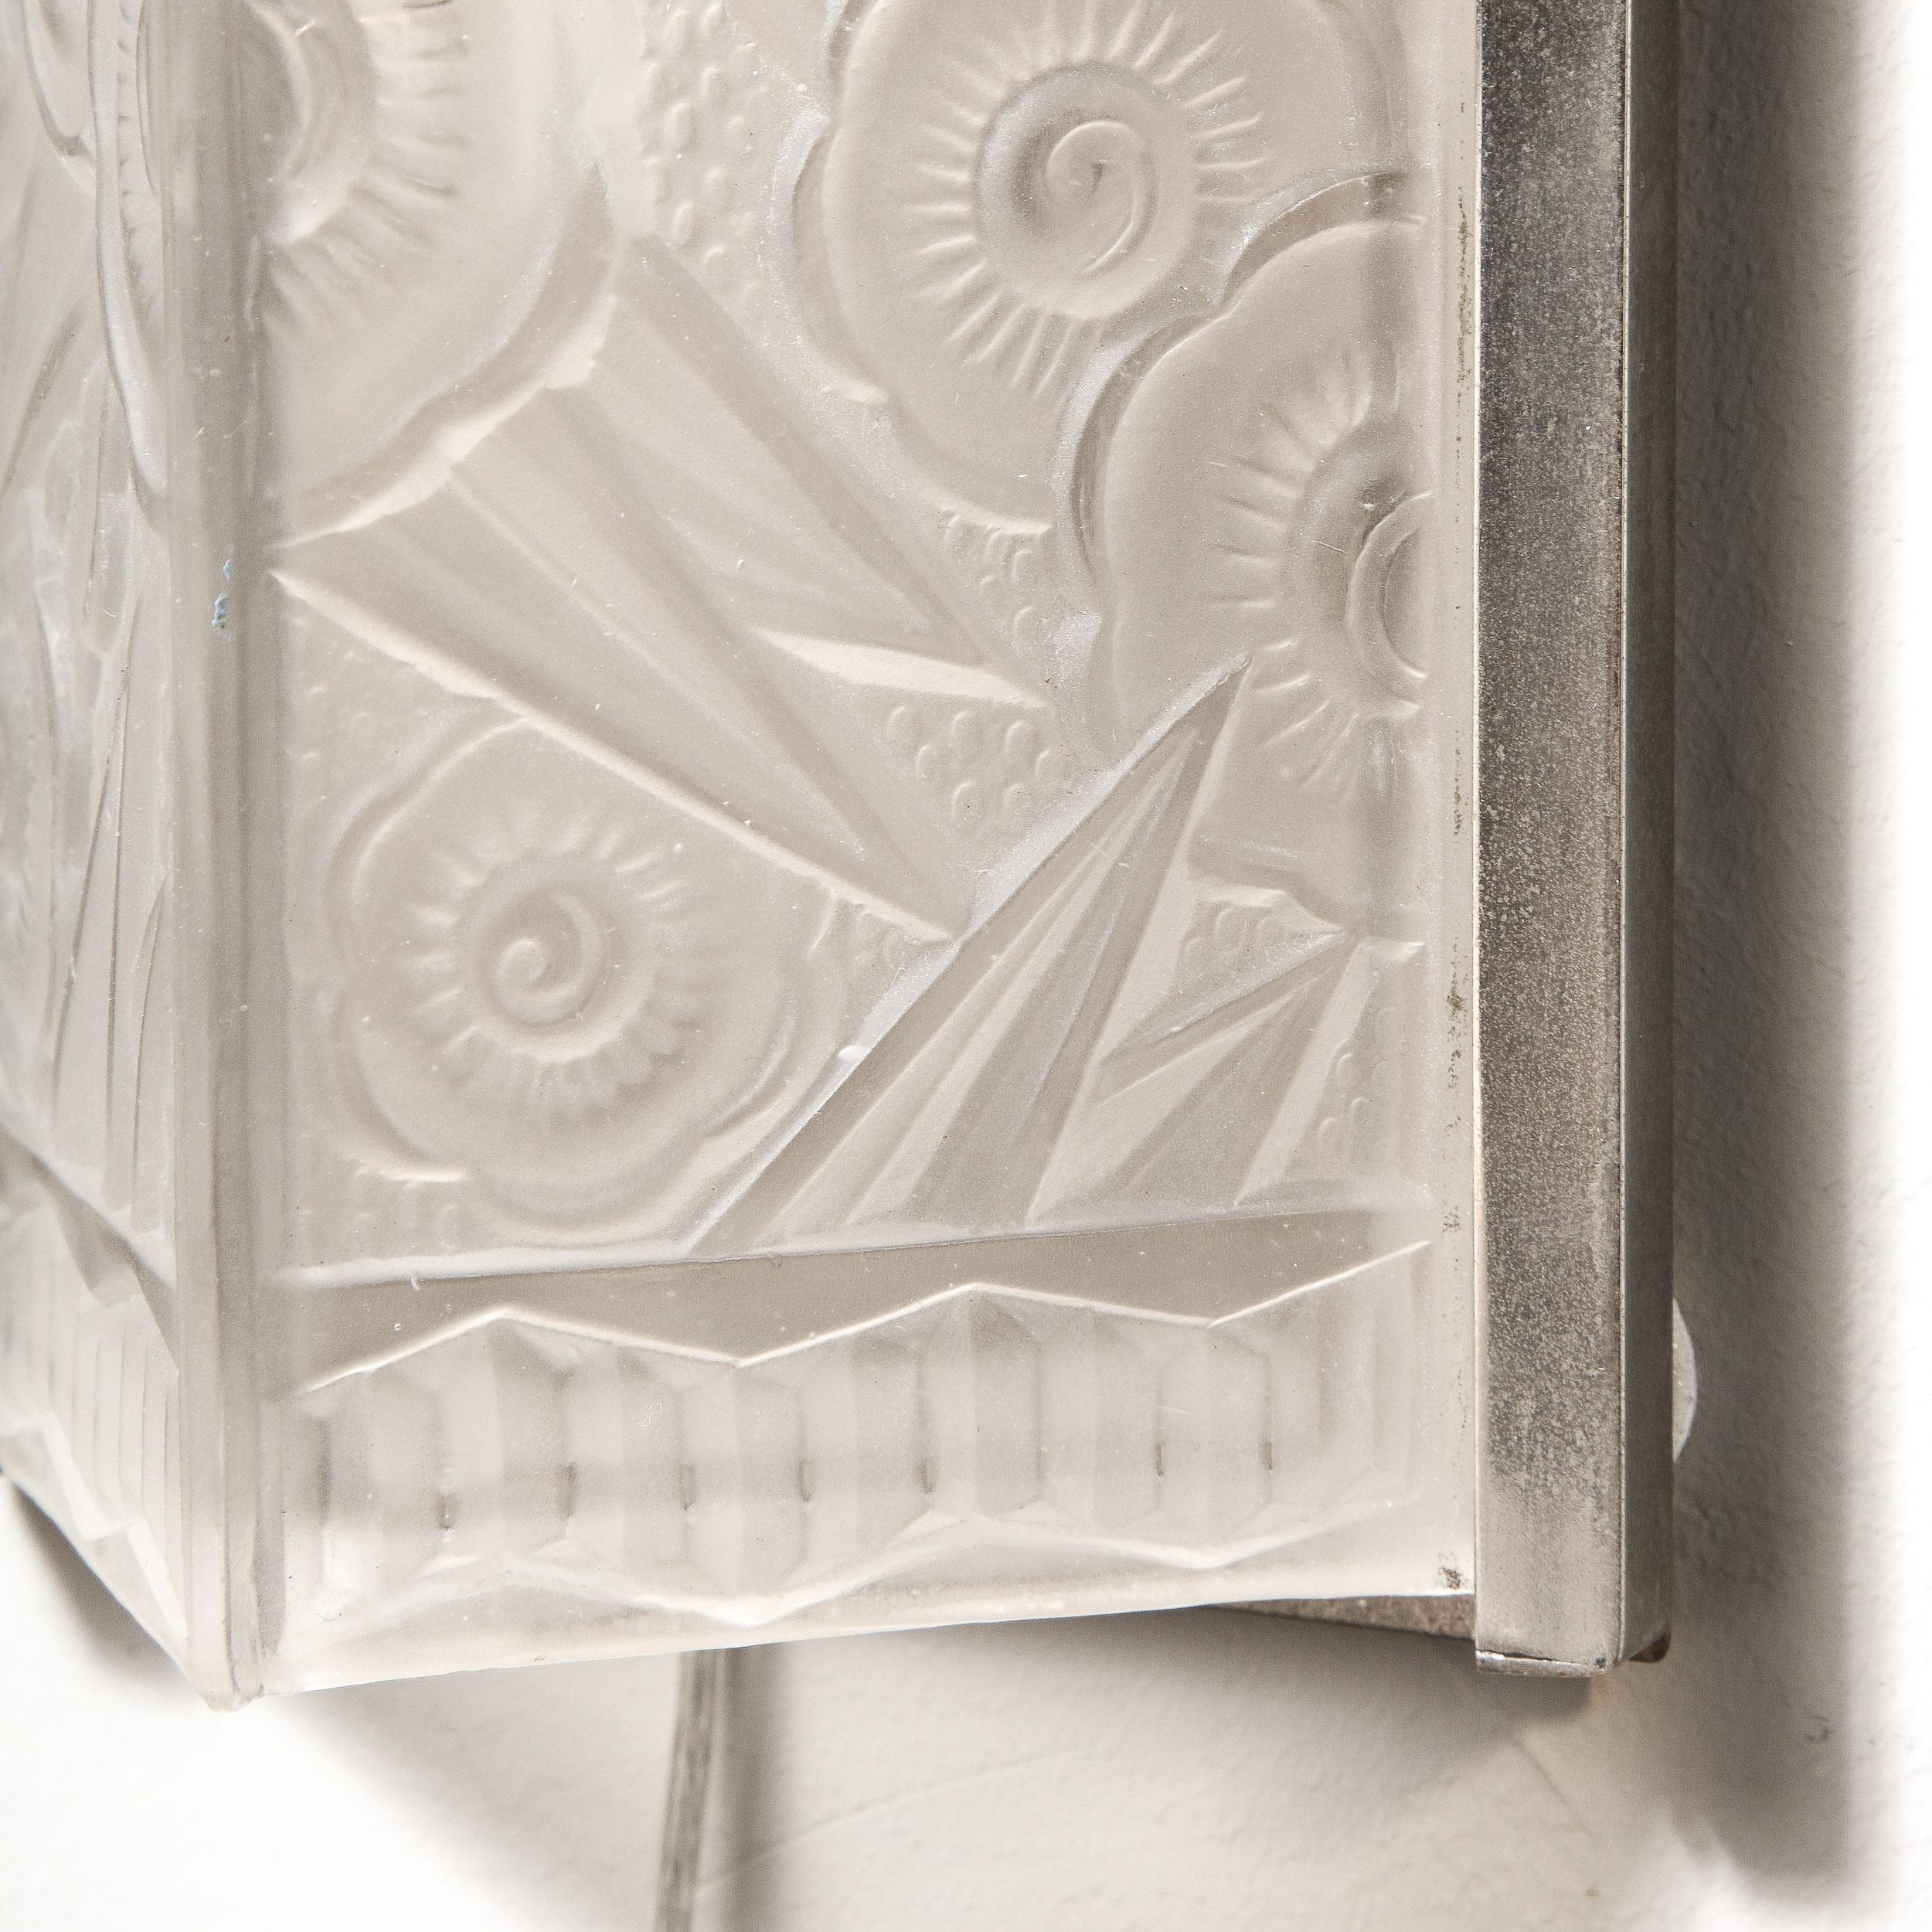 Pair of Art Deco Molded & Frosted Glass Sconces w/ Stylized Cubist Floral Motifs 14